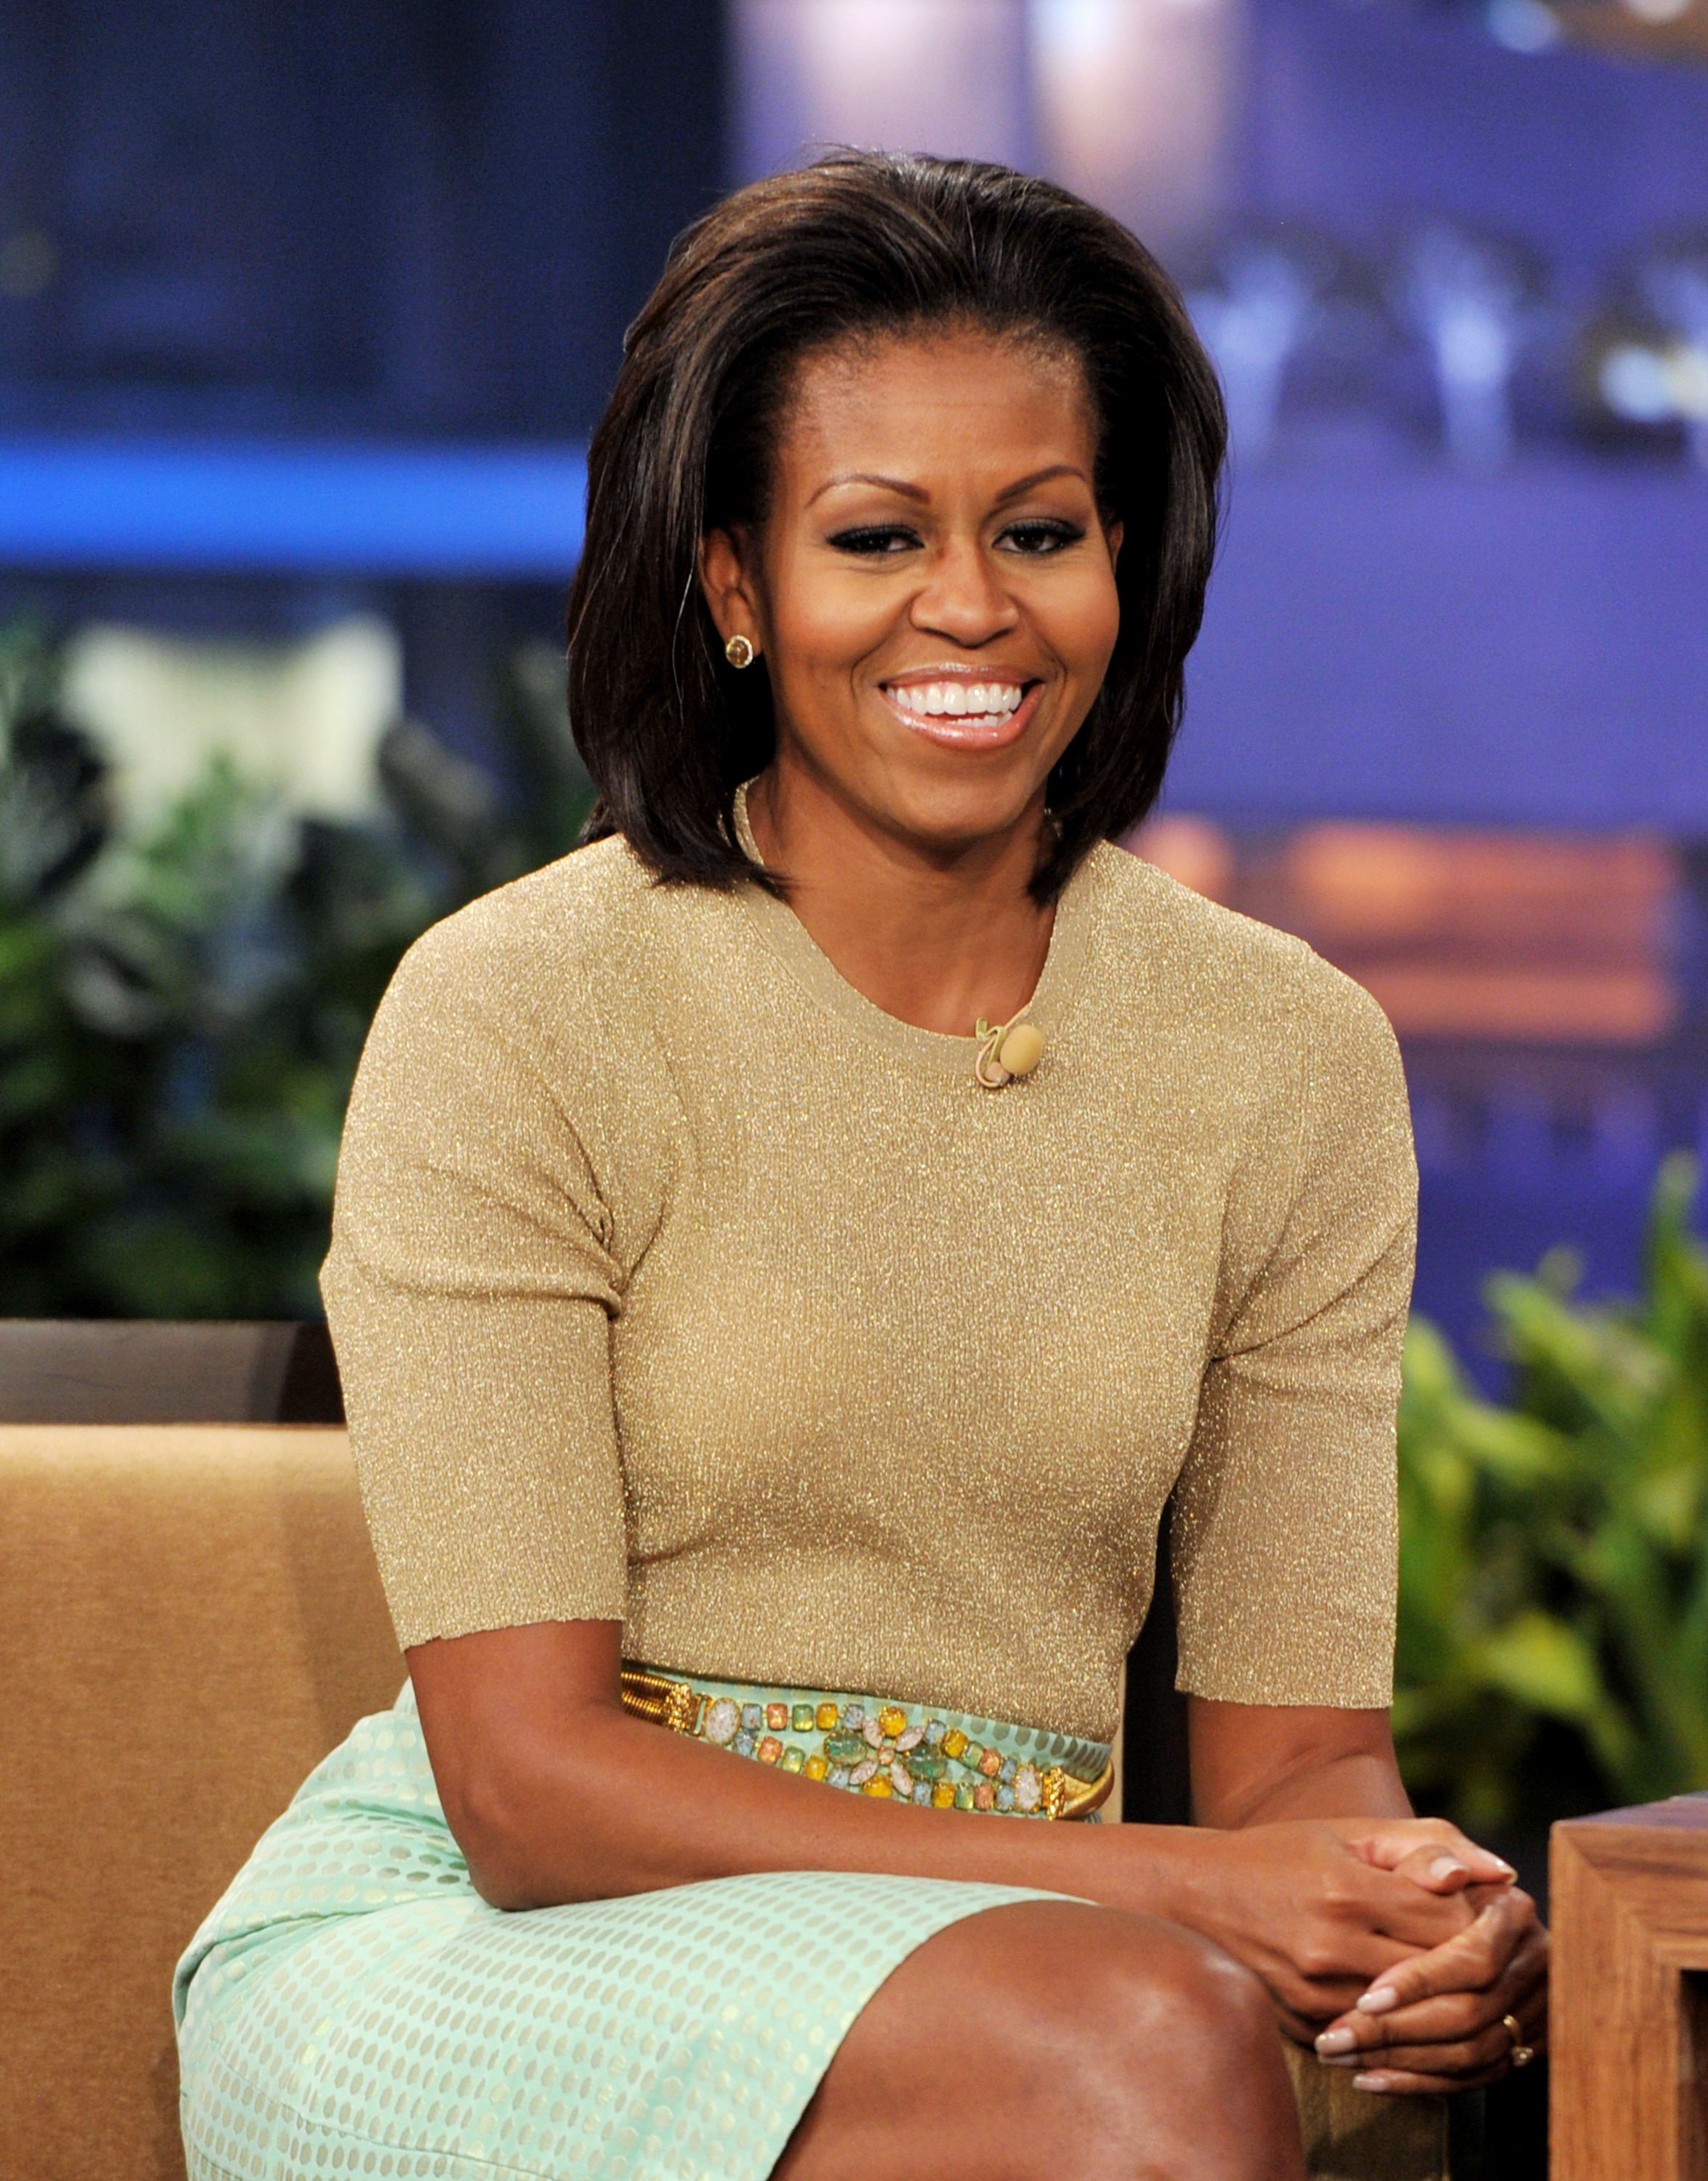 Michelle Obama appearing on "The Tonight Show with Jay Leno in January 2012. | Photo: Getty Images